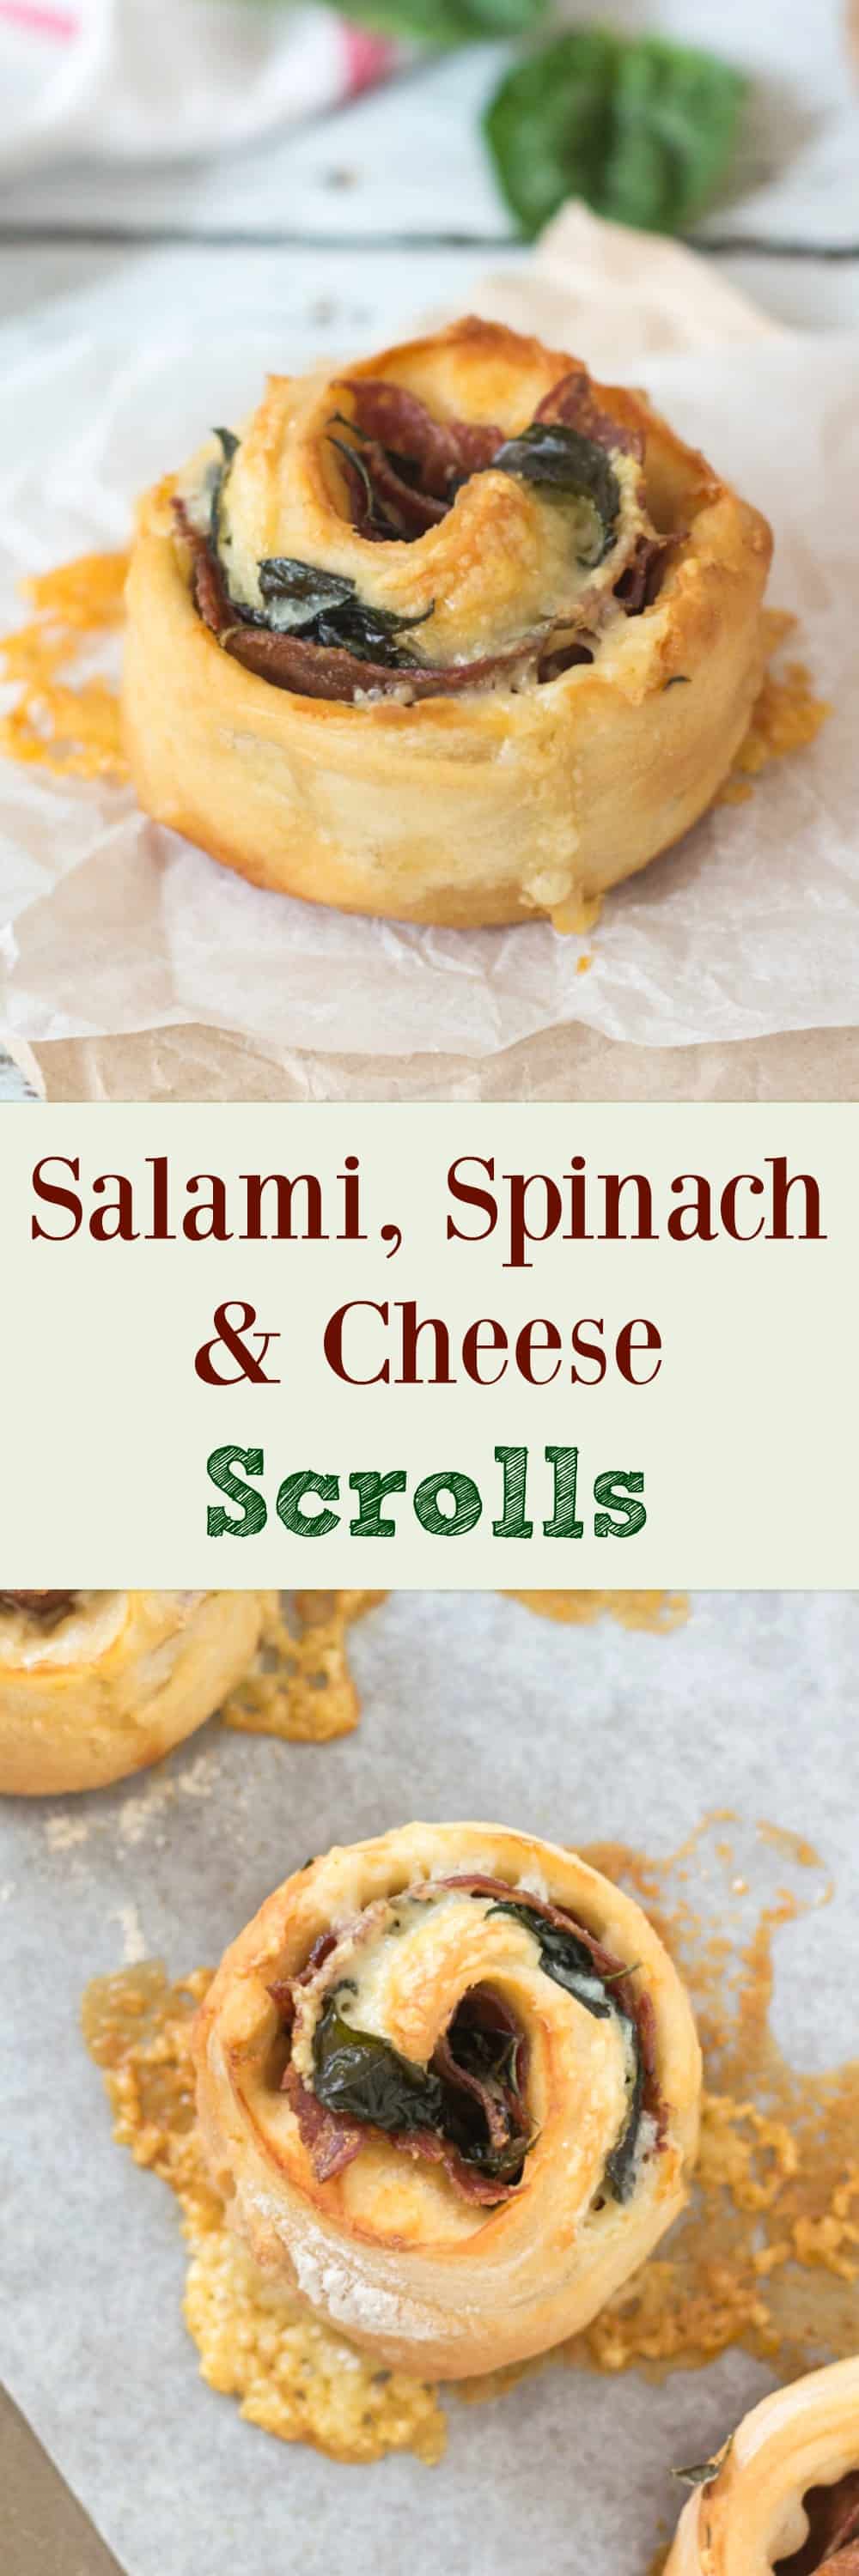 Salami, Spinach & Cheese Scrolls. Perfect for an easy, speedy lunch. Leftovers freeze well, and are great in the lunchbox.